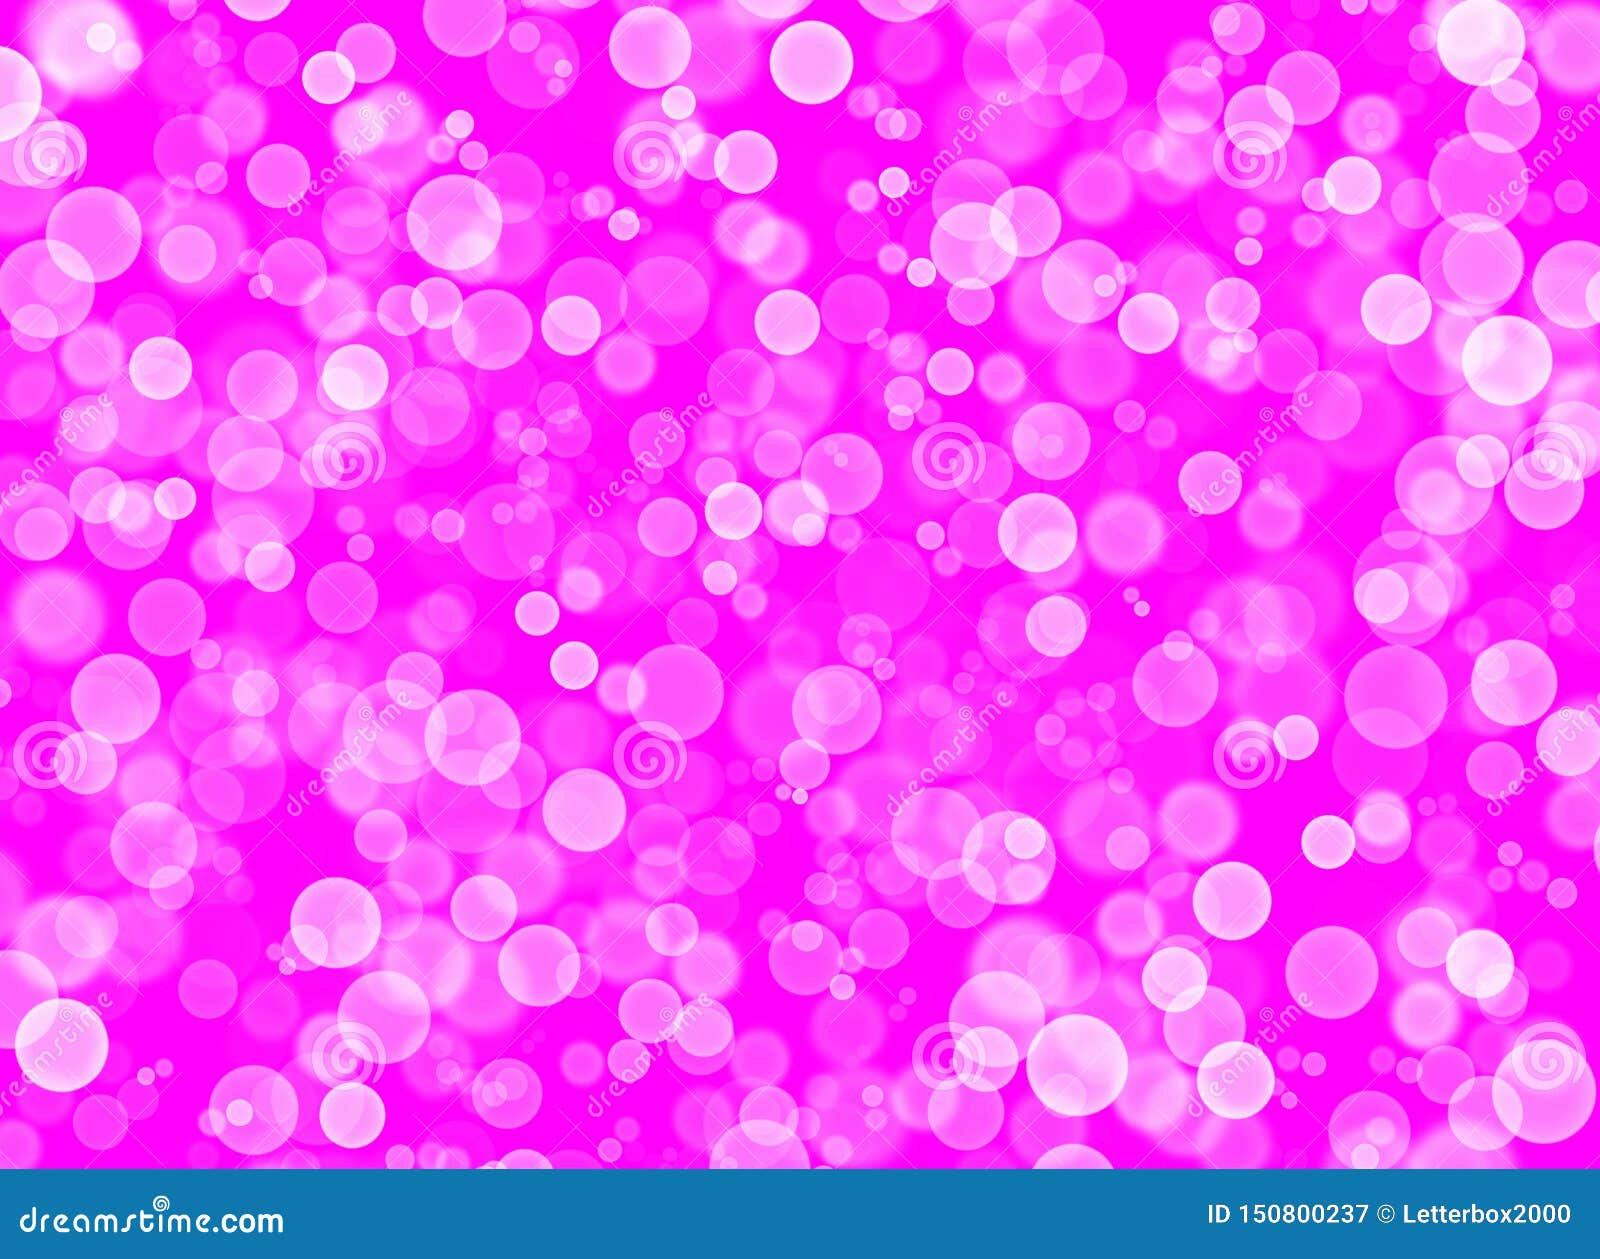 White Blurred Circles on a Bright Pink Background. Stock Illustration ...